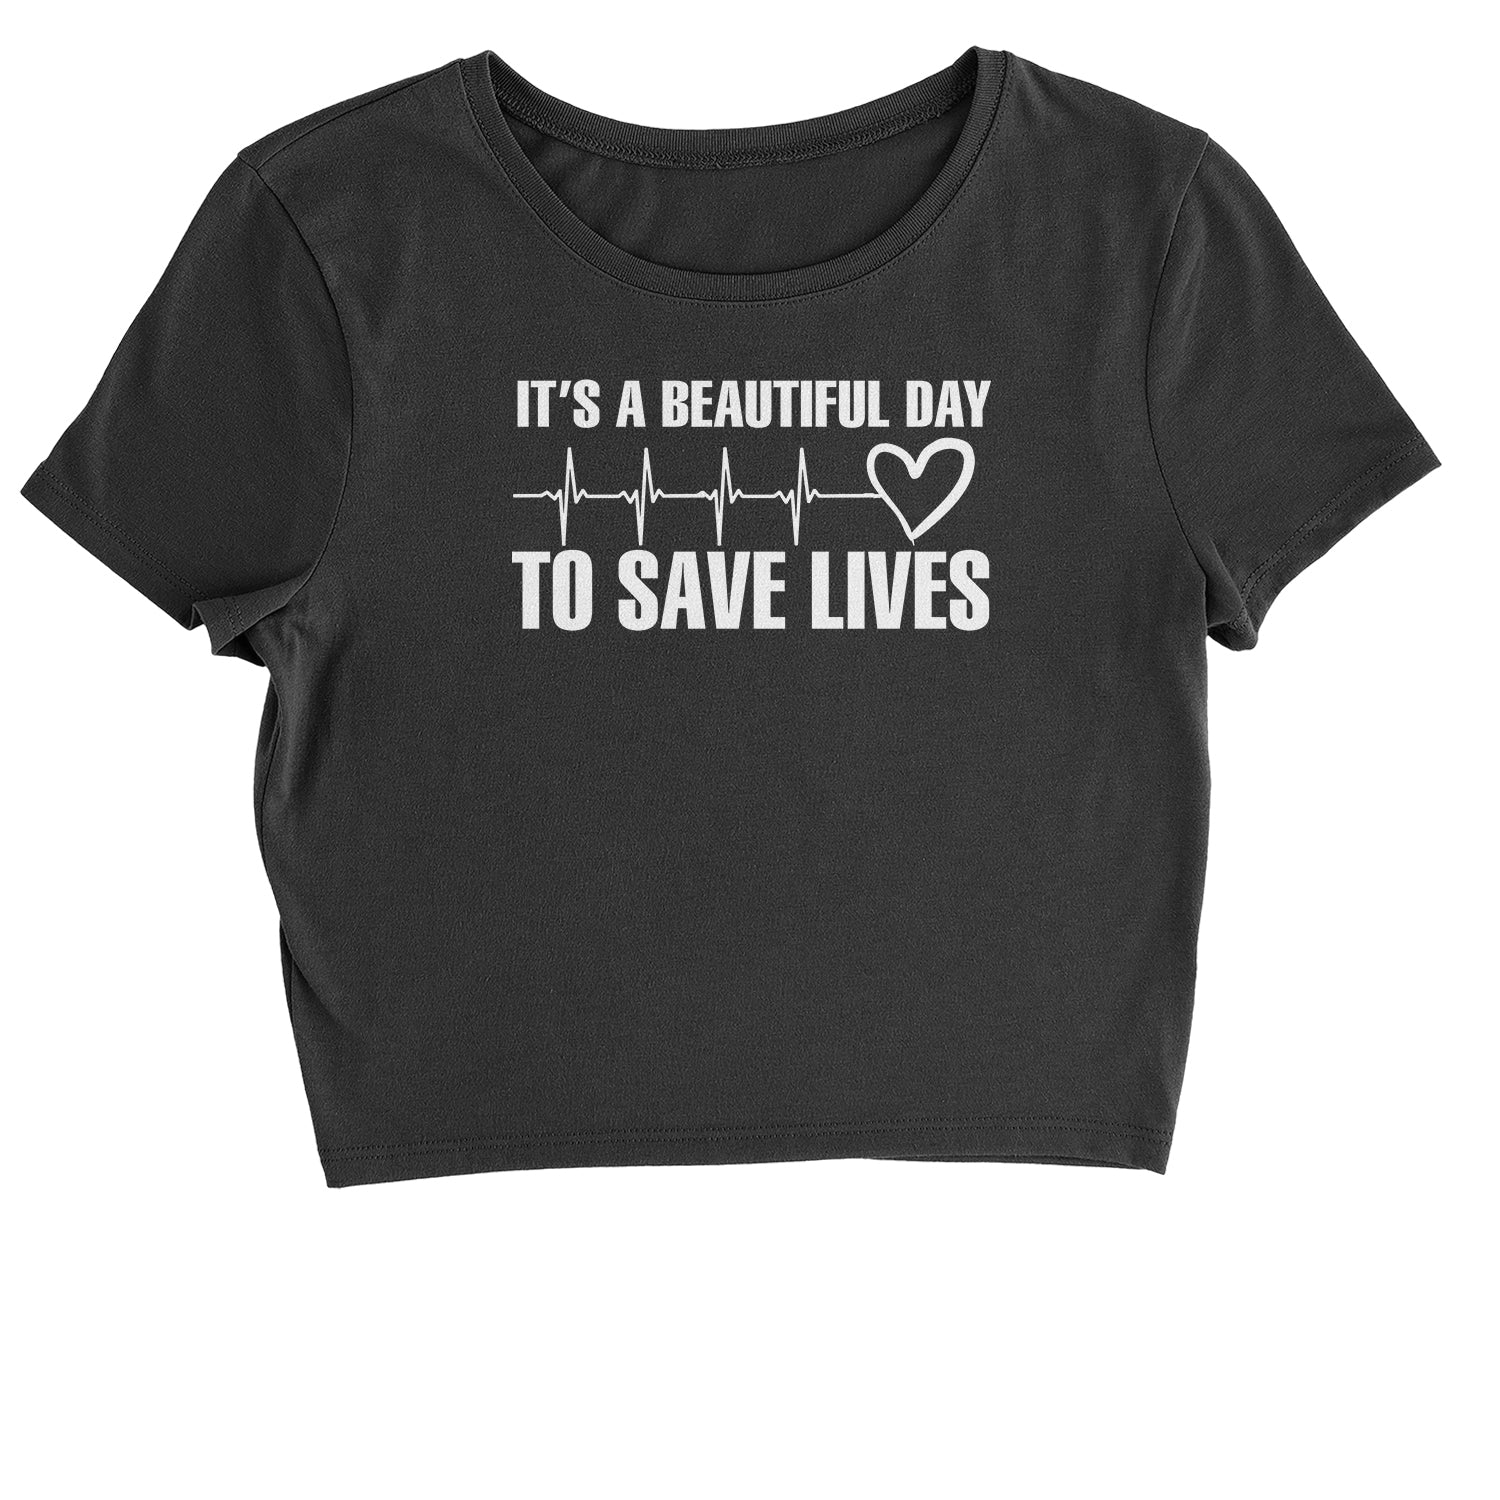 It's A Beautiful Day To Save Lives (White Print) Cropped T-Shirt #expressiontees by Expression Tees